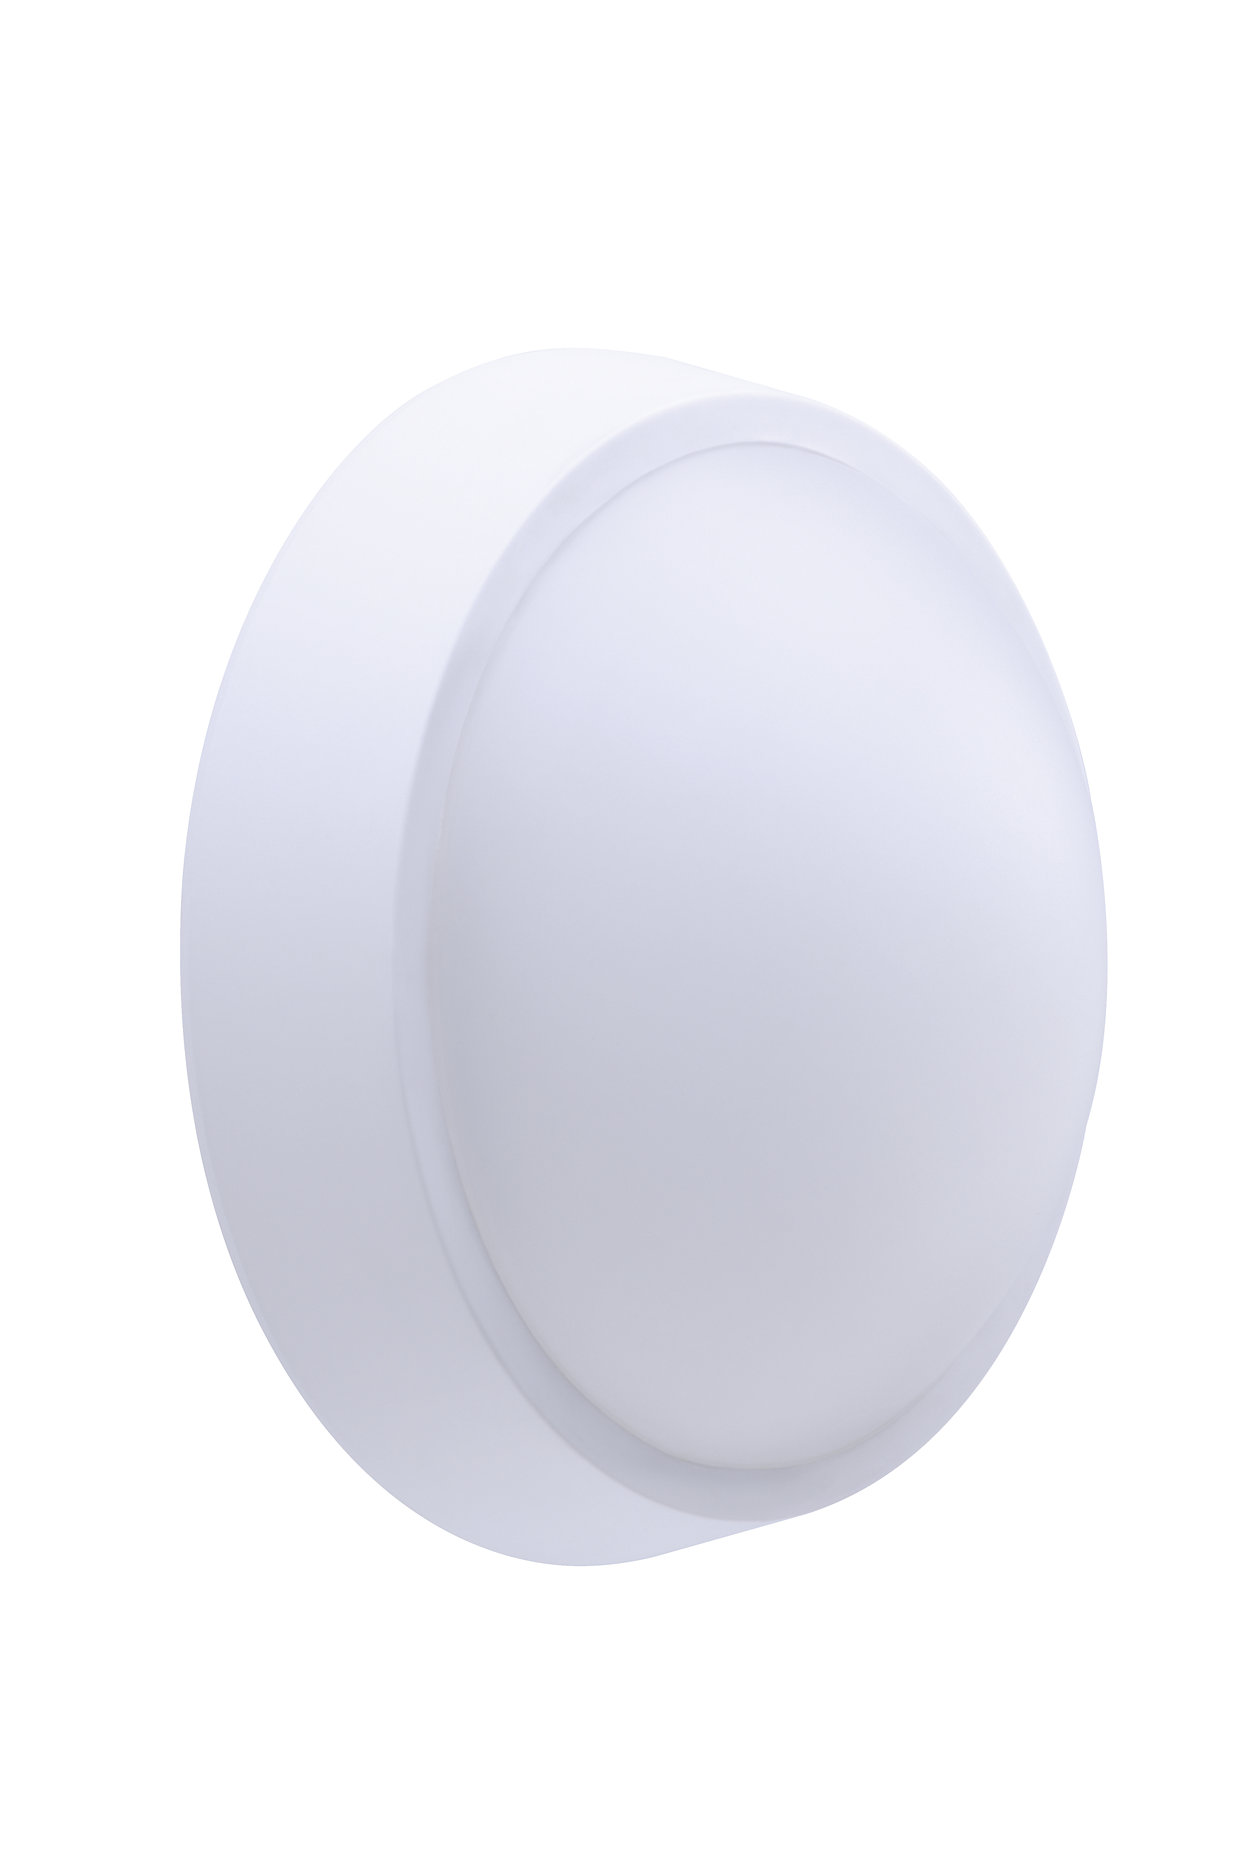 Essential smartbright bulkhead is great value for money. It is IP65 waterproof design and comes in 2 sizes based on your specific lighting needs.